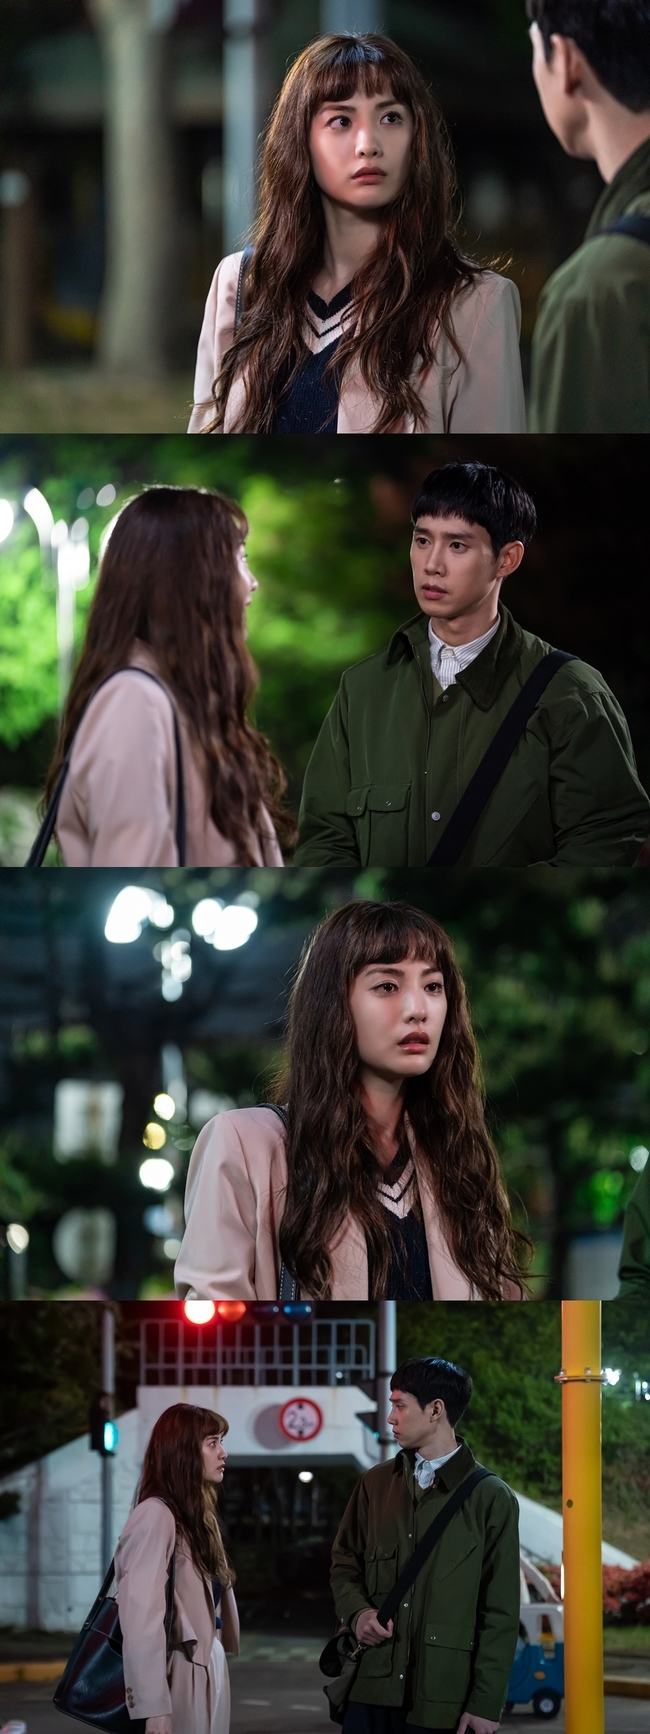 Nana, the start-off, weeps.KBS 2TV Tree Drama, which was broadcast on July 8, did not get a job to do it, but the 3rd episode of the release table (playplaywright Moon Hyun-kyung/director Hwang Seung-ki, Choi Yeon-soo/hereinafter, The Outgoing Table) presented a thrilling and clunky catharsis to the house theater.Sarah (Nana), the civil servant who cast an exit vote instead of employment, was elected by three votes in the by-election of the Mawon-gu district council.It is a challenge that even my parents, as well as my best friends, have torn apart.I do not know anything about politics, I have not received any support because I am independent, but 9% of the residents of Mawon-gu listened to the words of Sarah, who came to me sincerely.Although it was for 50 million won in annual salary, there is growing interest and expectation from the enthusiastic viewers about what kind of exciting cider Sarah will burst into the council.In the meantime, unlike everyones expectation that the production team of the exit ticket will be in high spirits after the election of the first district councilor on July 9, it is drawing attention by revealing the tearful former Sarah.The photo, released on July 9, captured a scene four times of the start-off list. In the photo, Sarah faces the crossing with Seo Gong-myeong (Park Sung-hoon).But the mood between the two is not so great - it seems to be having a rather serious conversation.It is 180 degrees different from the one that I worked in the latent work together on the three broadcasts just a day ago, followed the campaign, and gave a cute romance atmosphere.Among them, tears flowing from the eyes of Sarah rob their eyes.Sarah, who was not tearful when he was forced to resign from the candidates resignation when he was bribed to resign, and when he was forced to resign from the candidates job.Why did Sarah so wept? What did the West Gong-myeong say to the Old Sarah, and the Old Sarah sobbed?In this regard, the production team of the exit table said, In the fourth episode broadcast today (9th), Sarah will hear shocking facts from the resonance.This is a very important issue that is directly linked to the former Sarahs vote of exit in the district, and you can most clearly identify the characteristics of the former Sarah Character.Nana, Park Sung-hoon, two actors, crossed the seriousness and lightness and played an act of immersion in an instant.I would like to ask for your interest and expectation. bak-beauty